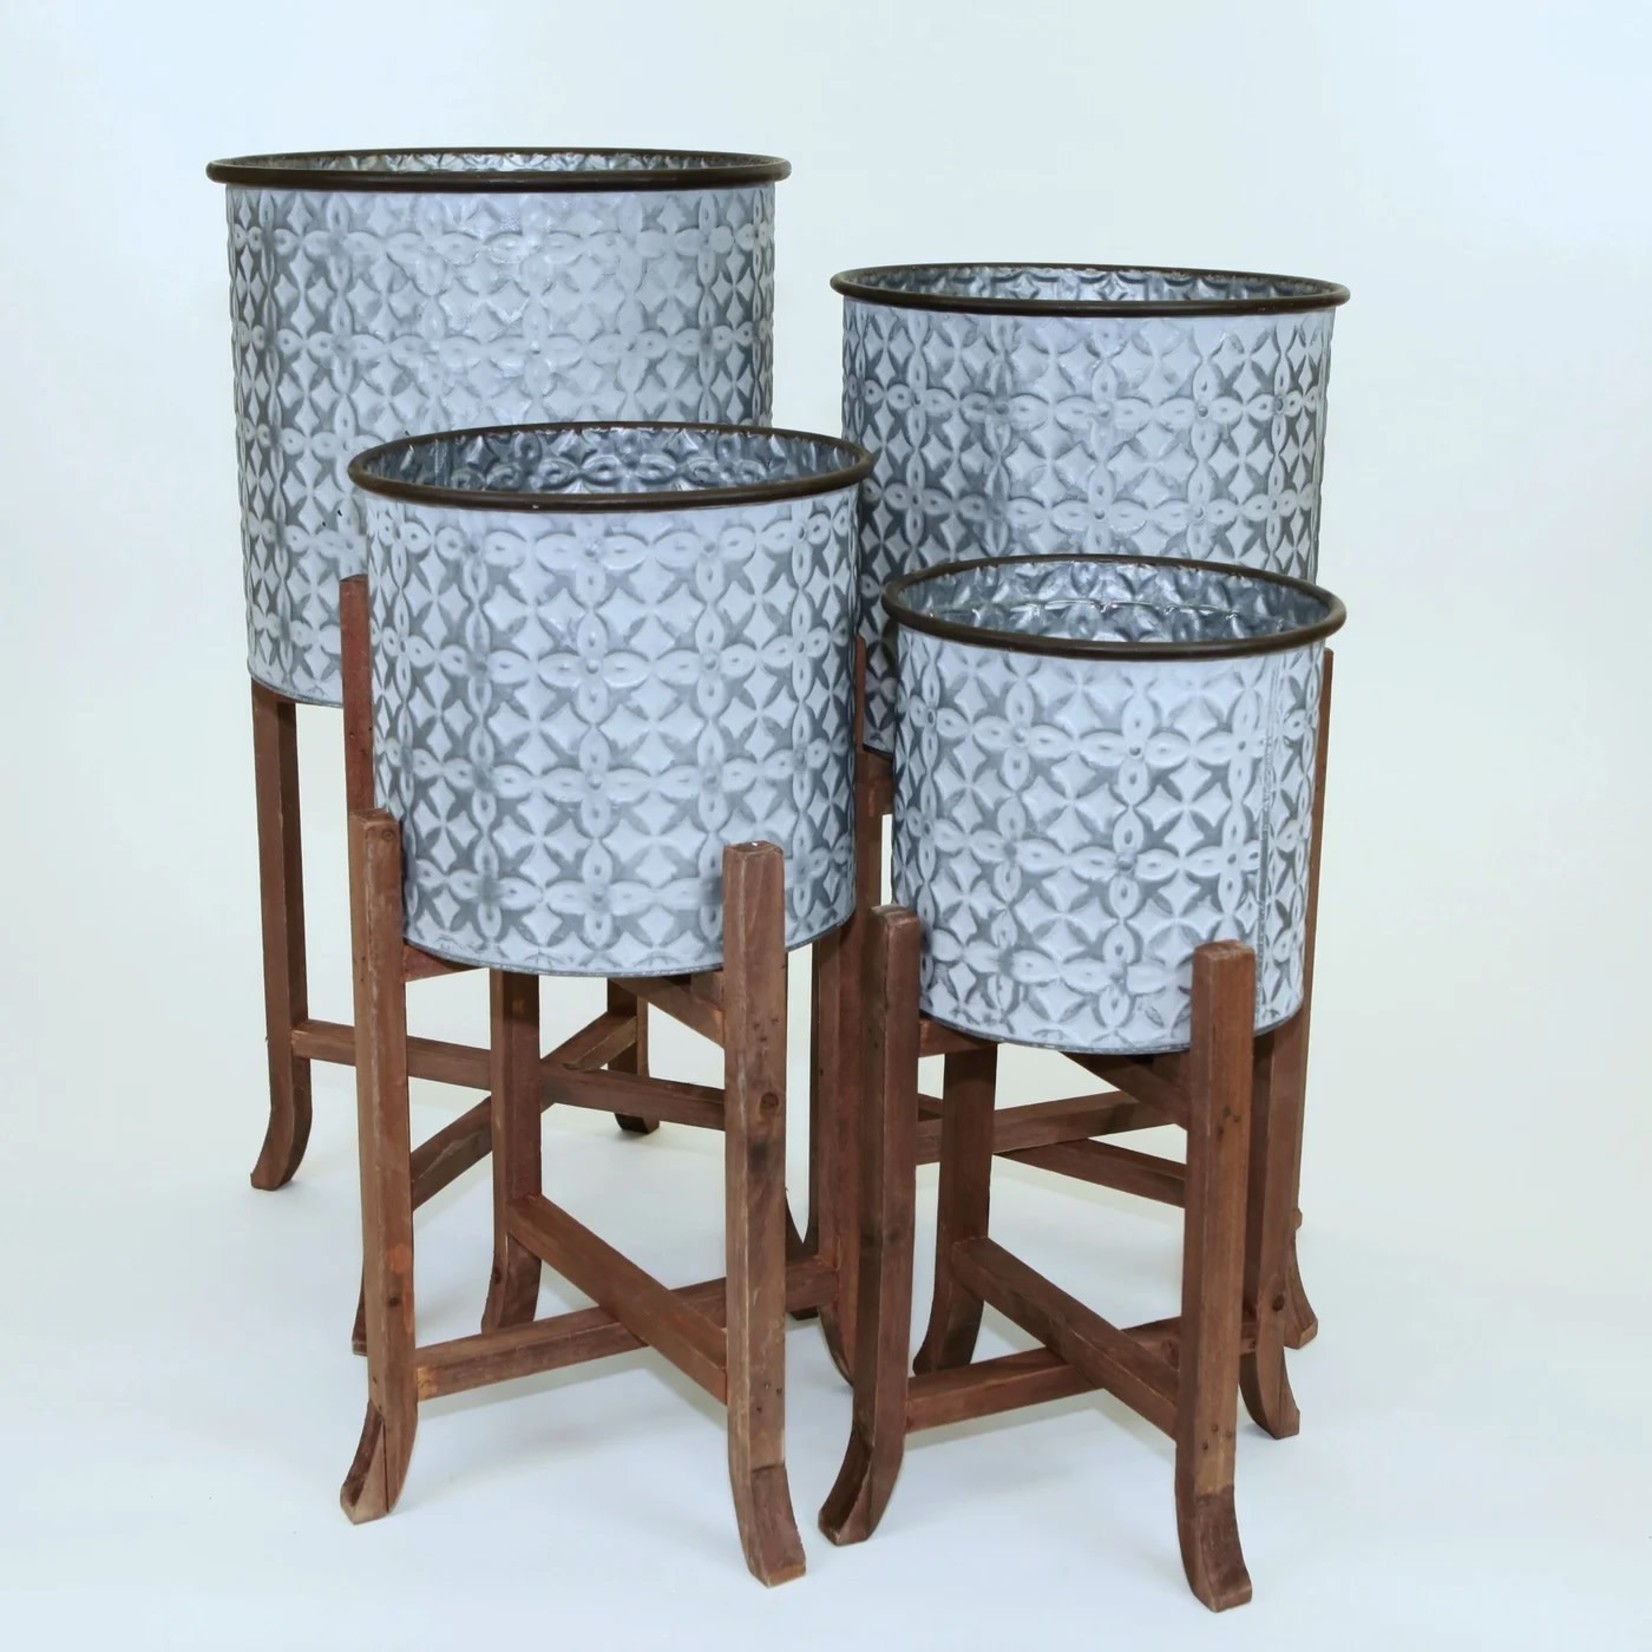 Metal Pots on Wood Stands-S